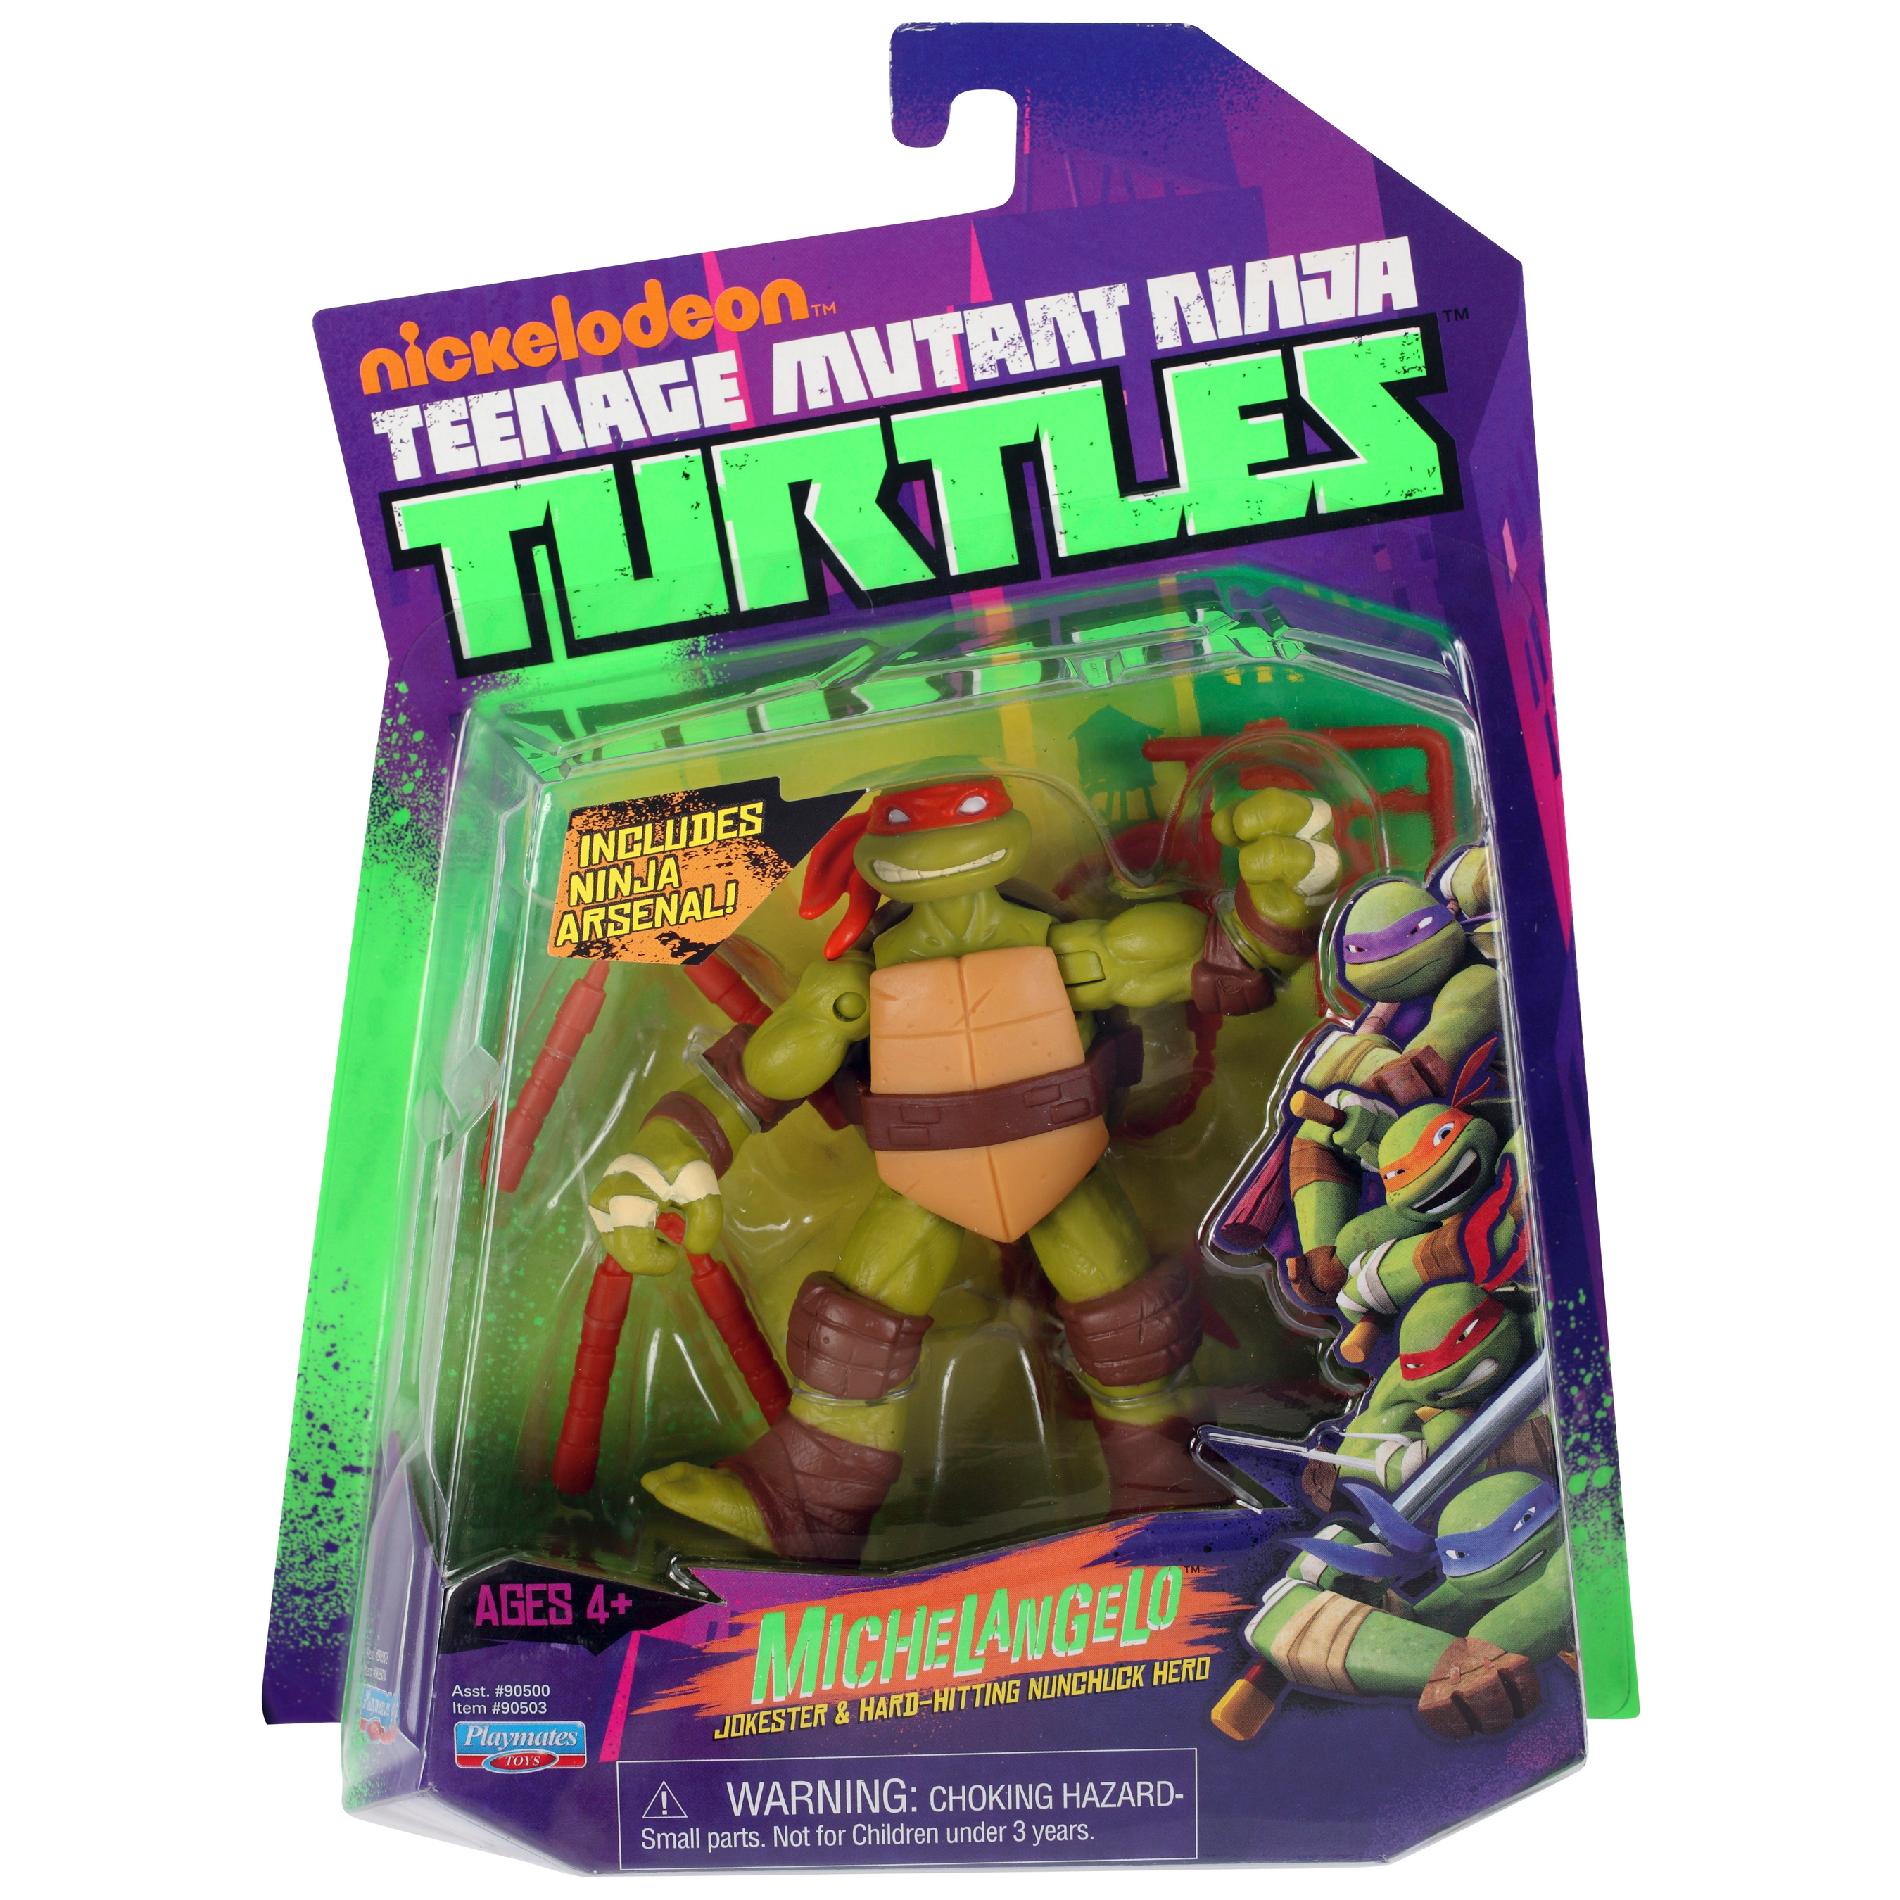 https://static.wikia.nocookie.net/tmnt/images/f/fd/Spin_prod_848376612.jpg/revision/latest?cb=20131221115445